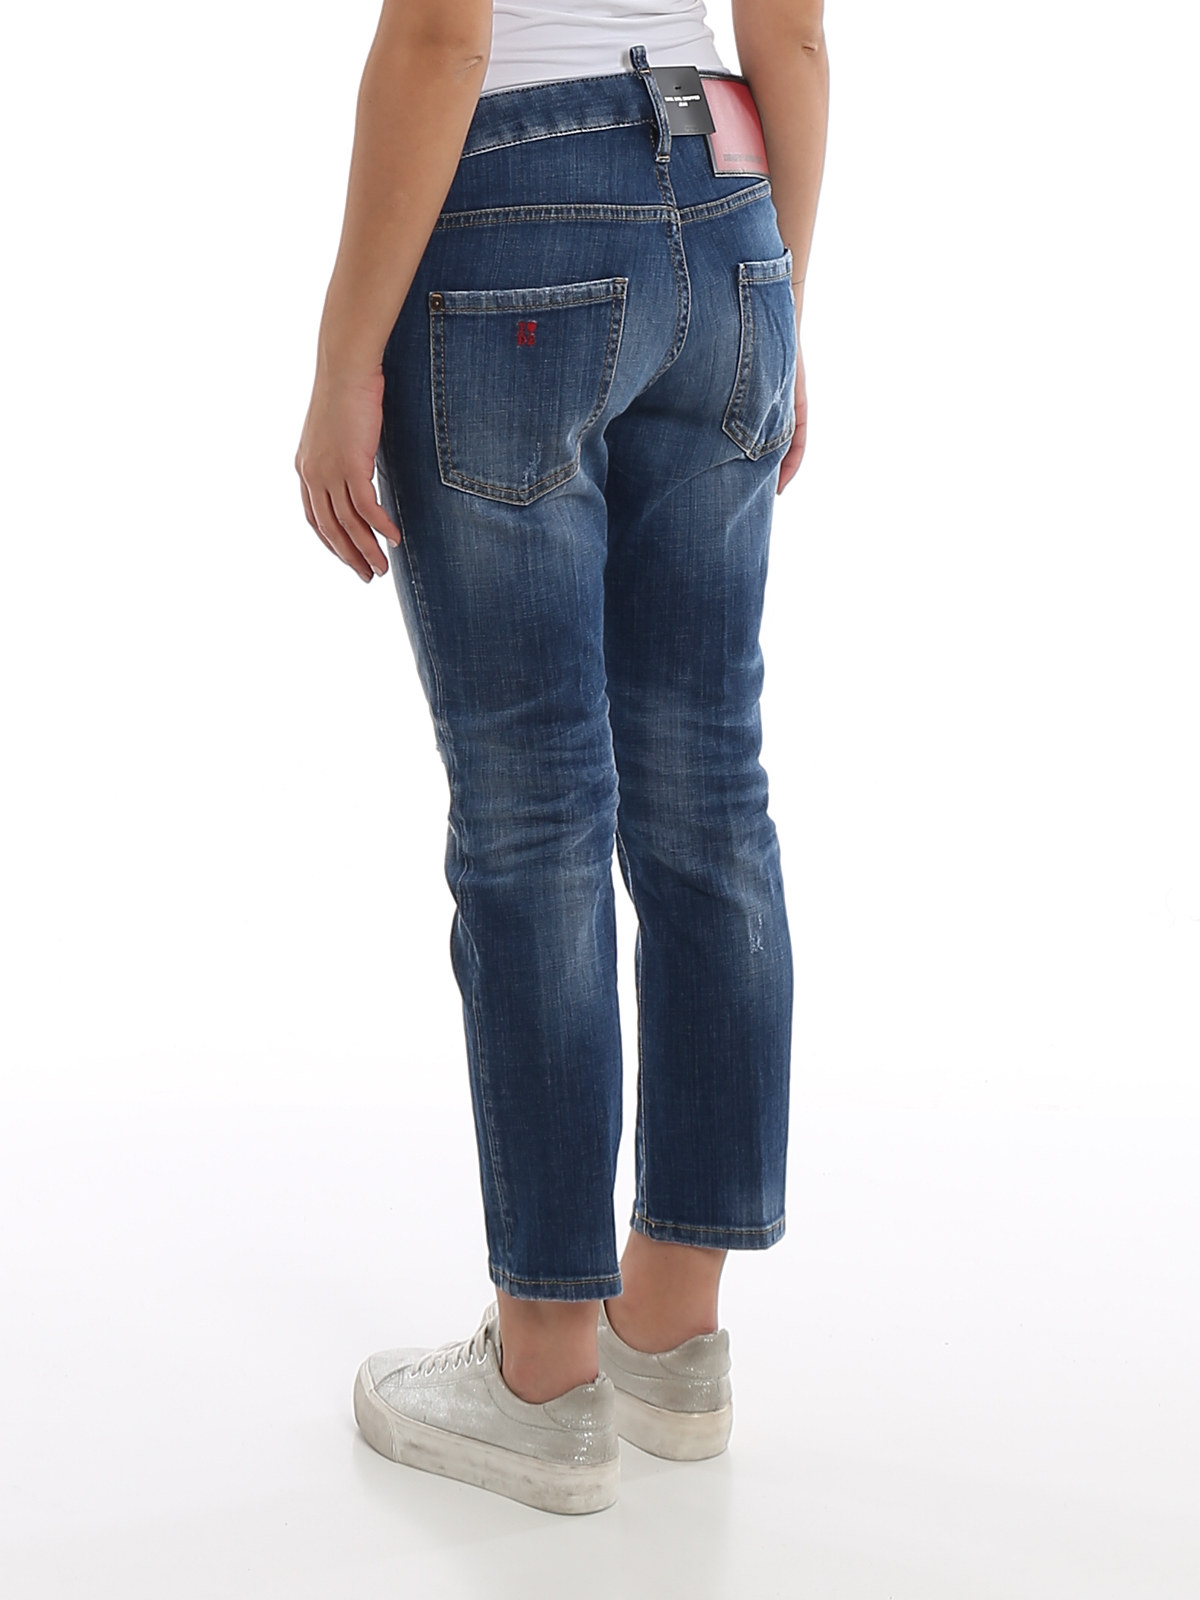 DSQUARED2 Cool Girl Cropped blue jeans www.krzysztofbialy.com